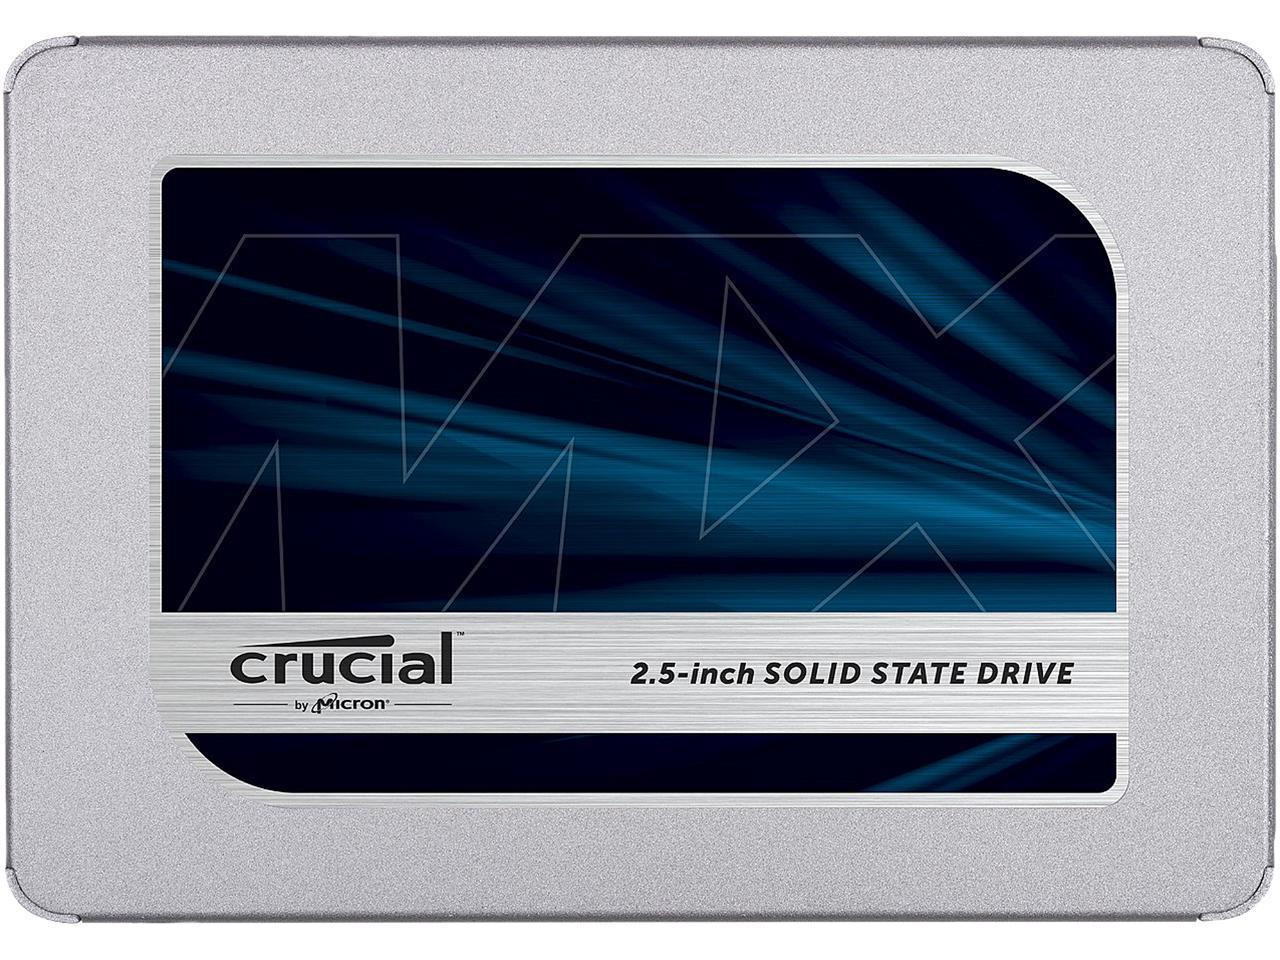 Media asset in full size related to 3dfxzone.it news item entitled as follows: Crucial introduce la linea di SSD MX500 con memoria 3D NAND di Micron | Image Name: news27660_Crucial-SSD-MX500_2.jpg